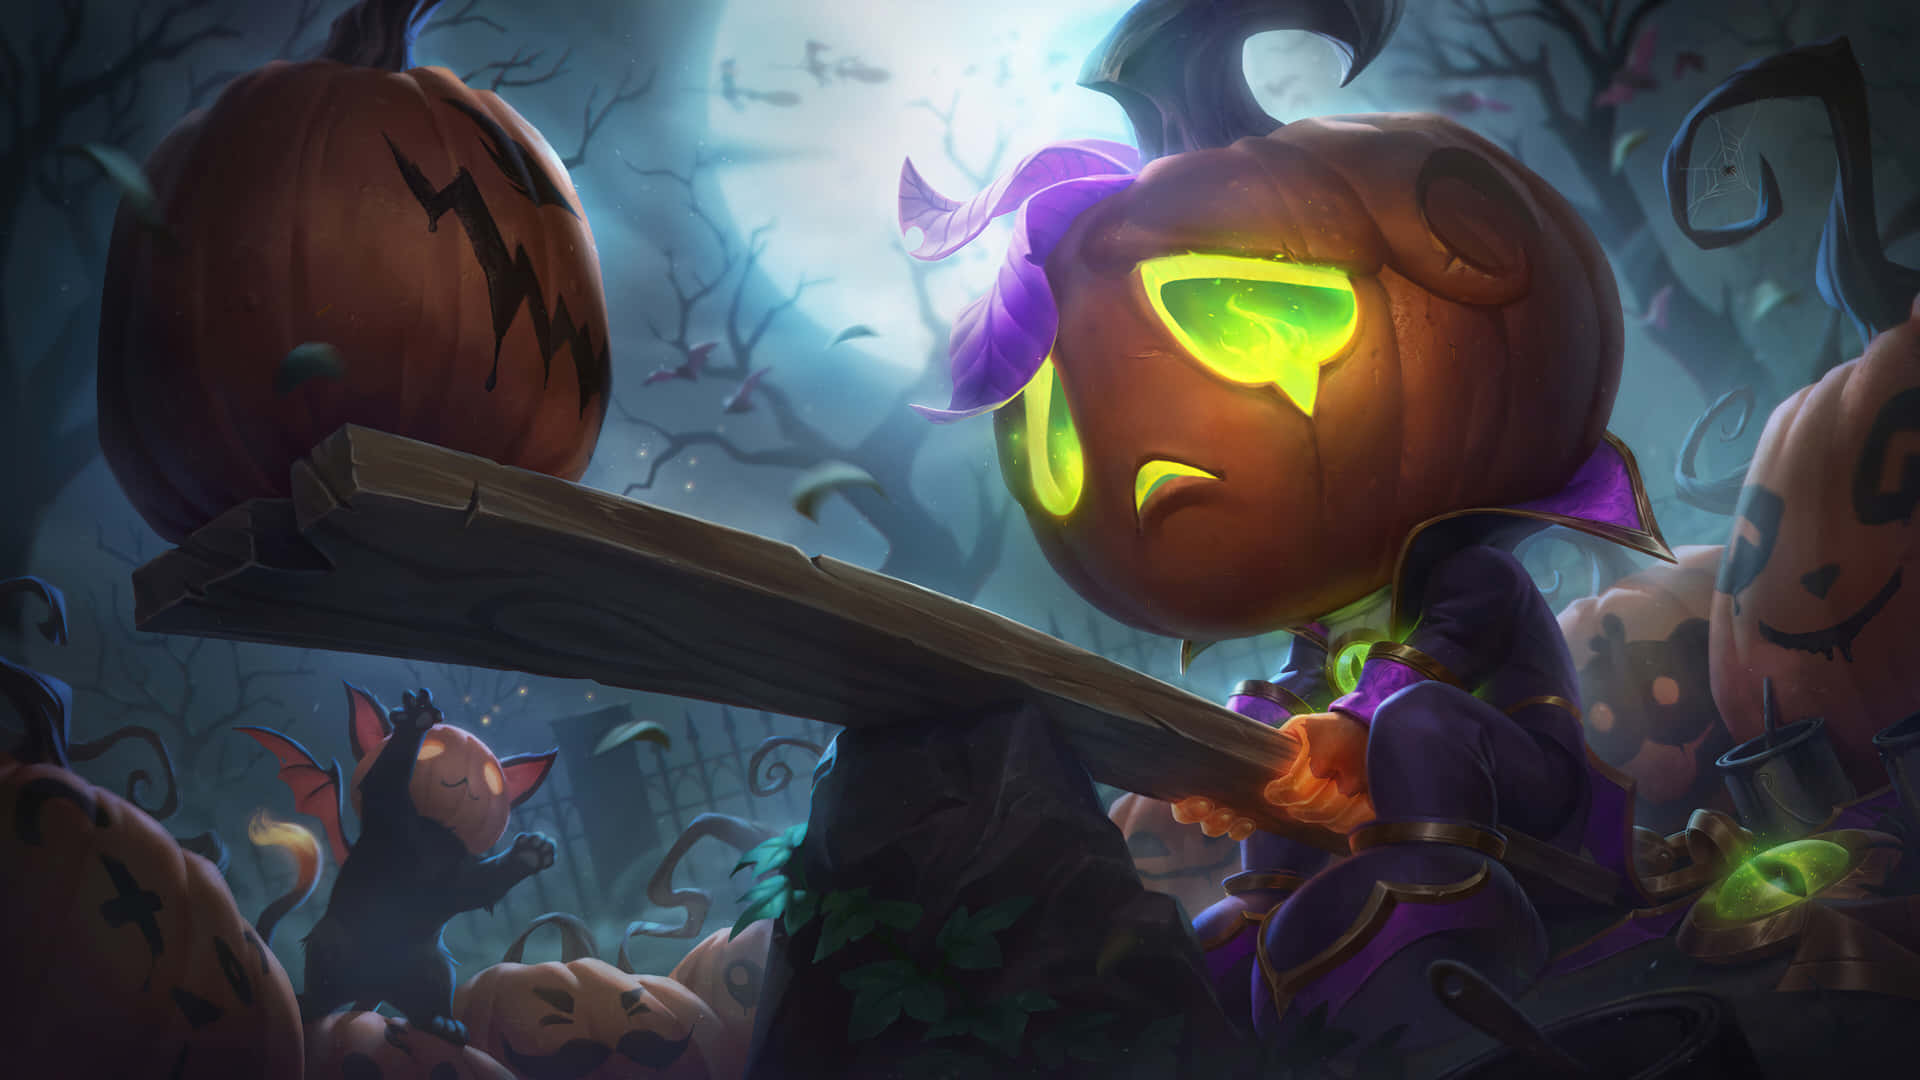 Enjoy a spooky and exciting Halloween night with a variety of fun games. Wallpaper